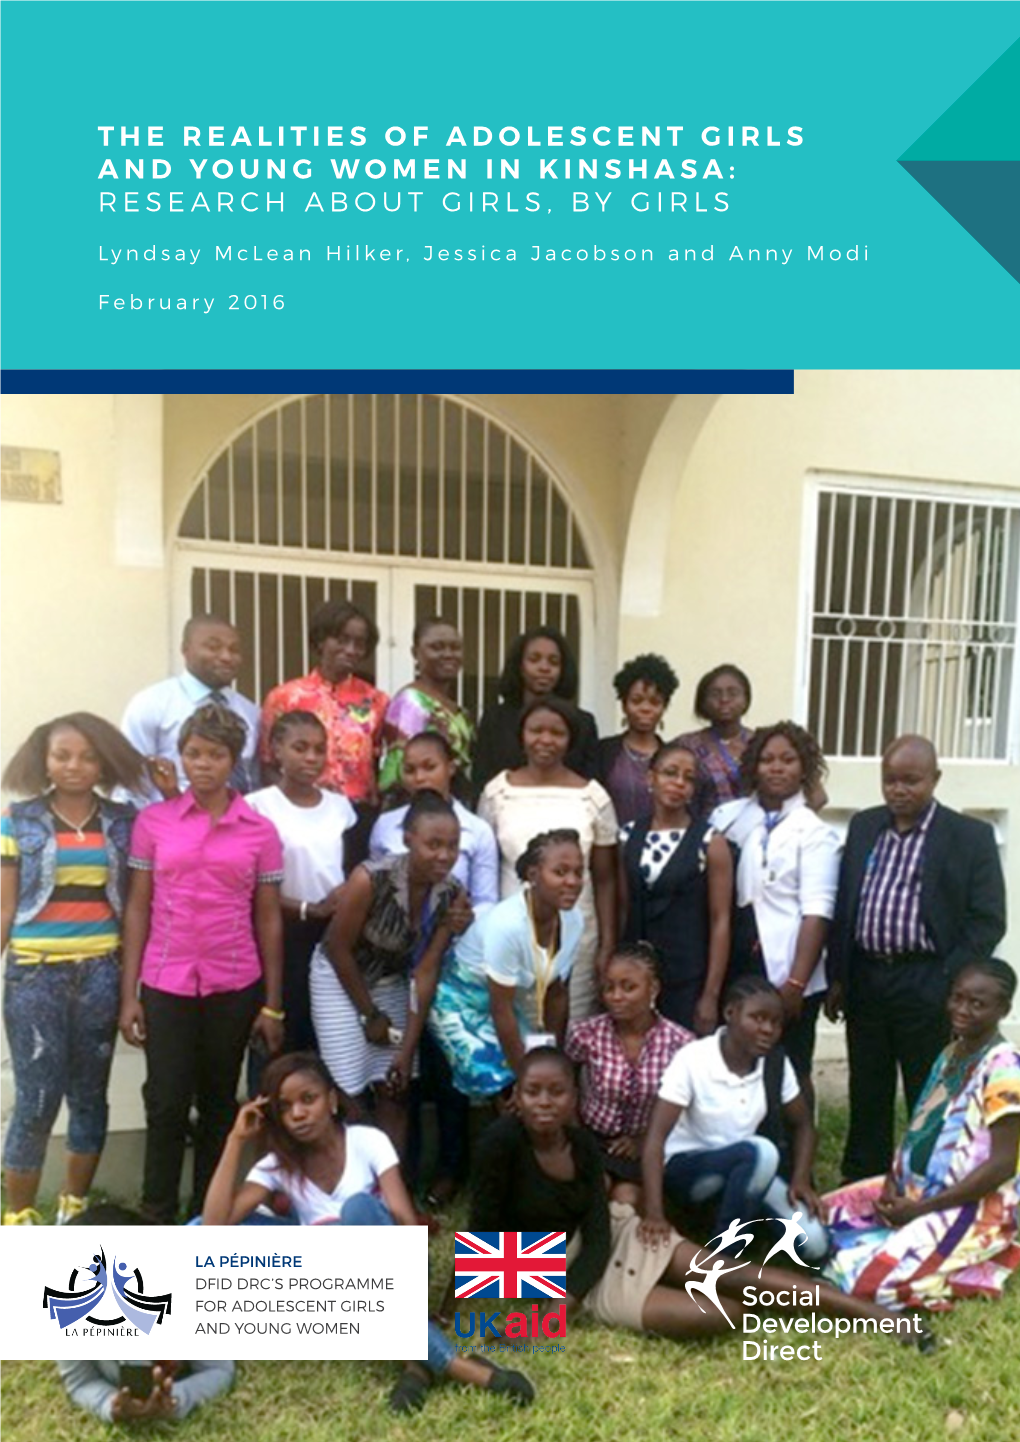 The Realities of Adolescent Girls and Young Women in Kinshasa: Research About Girls, by Girls